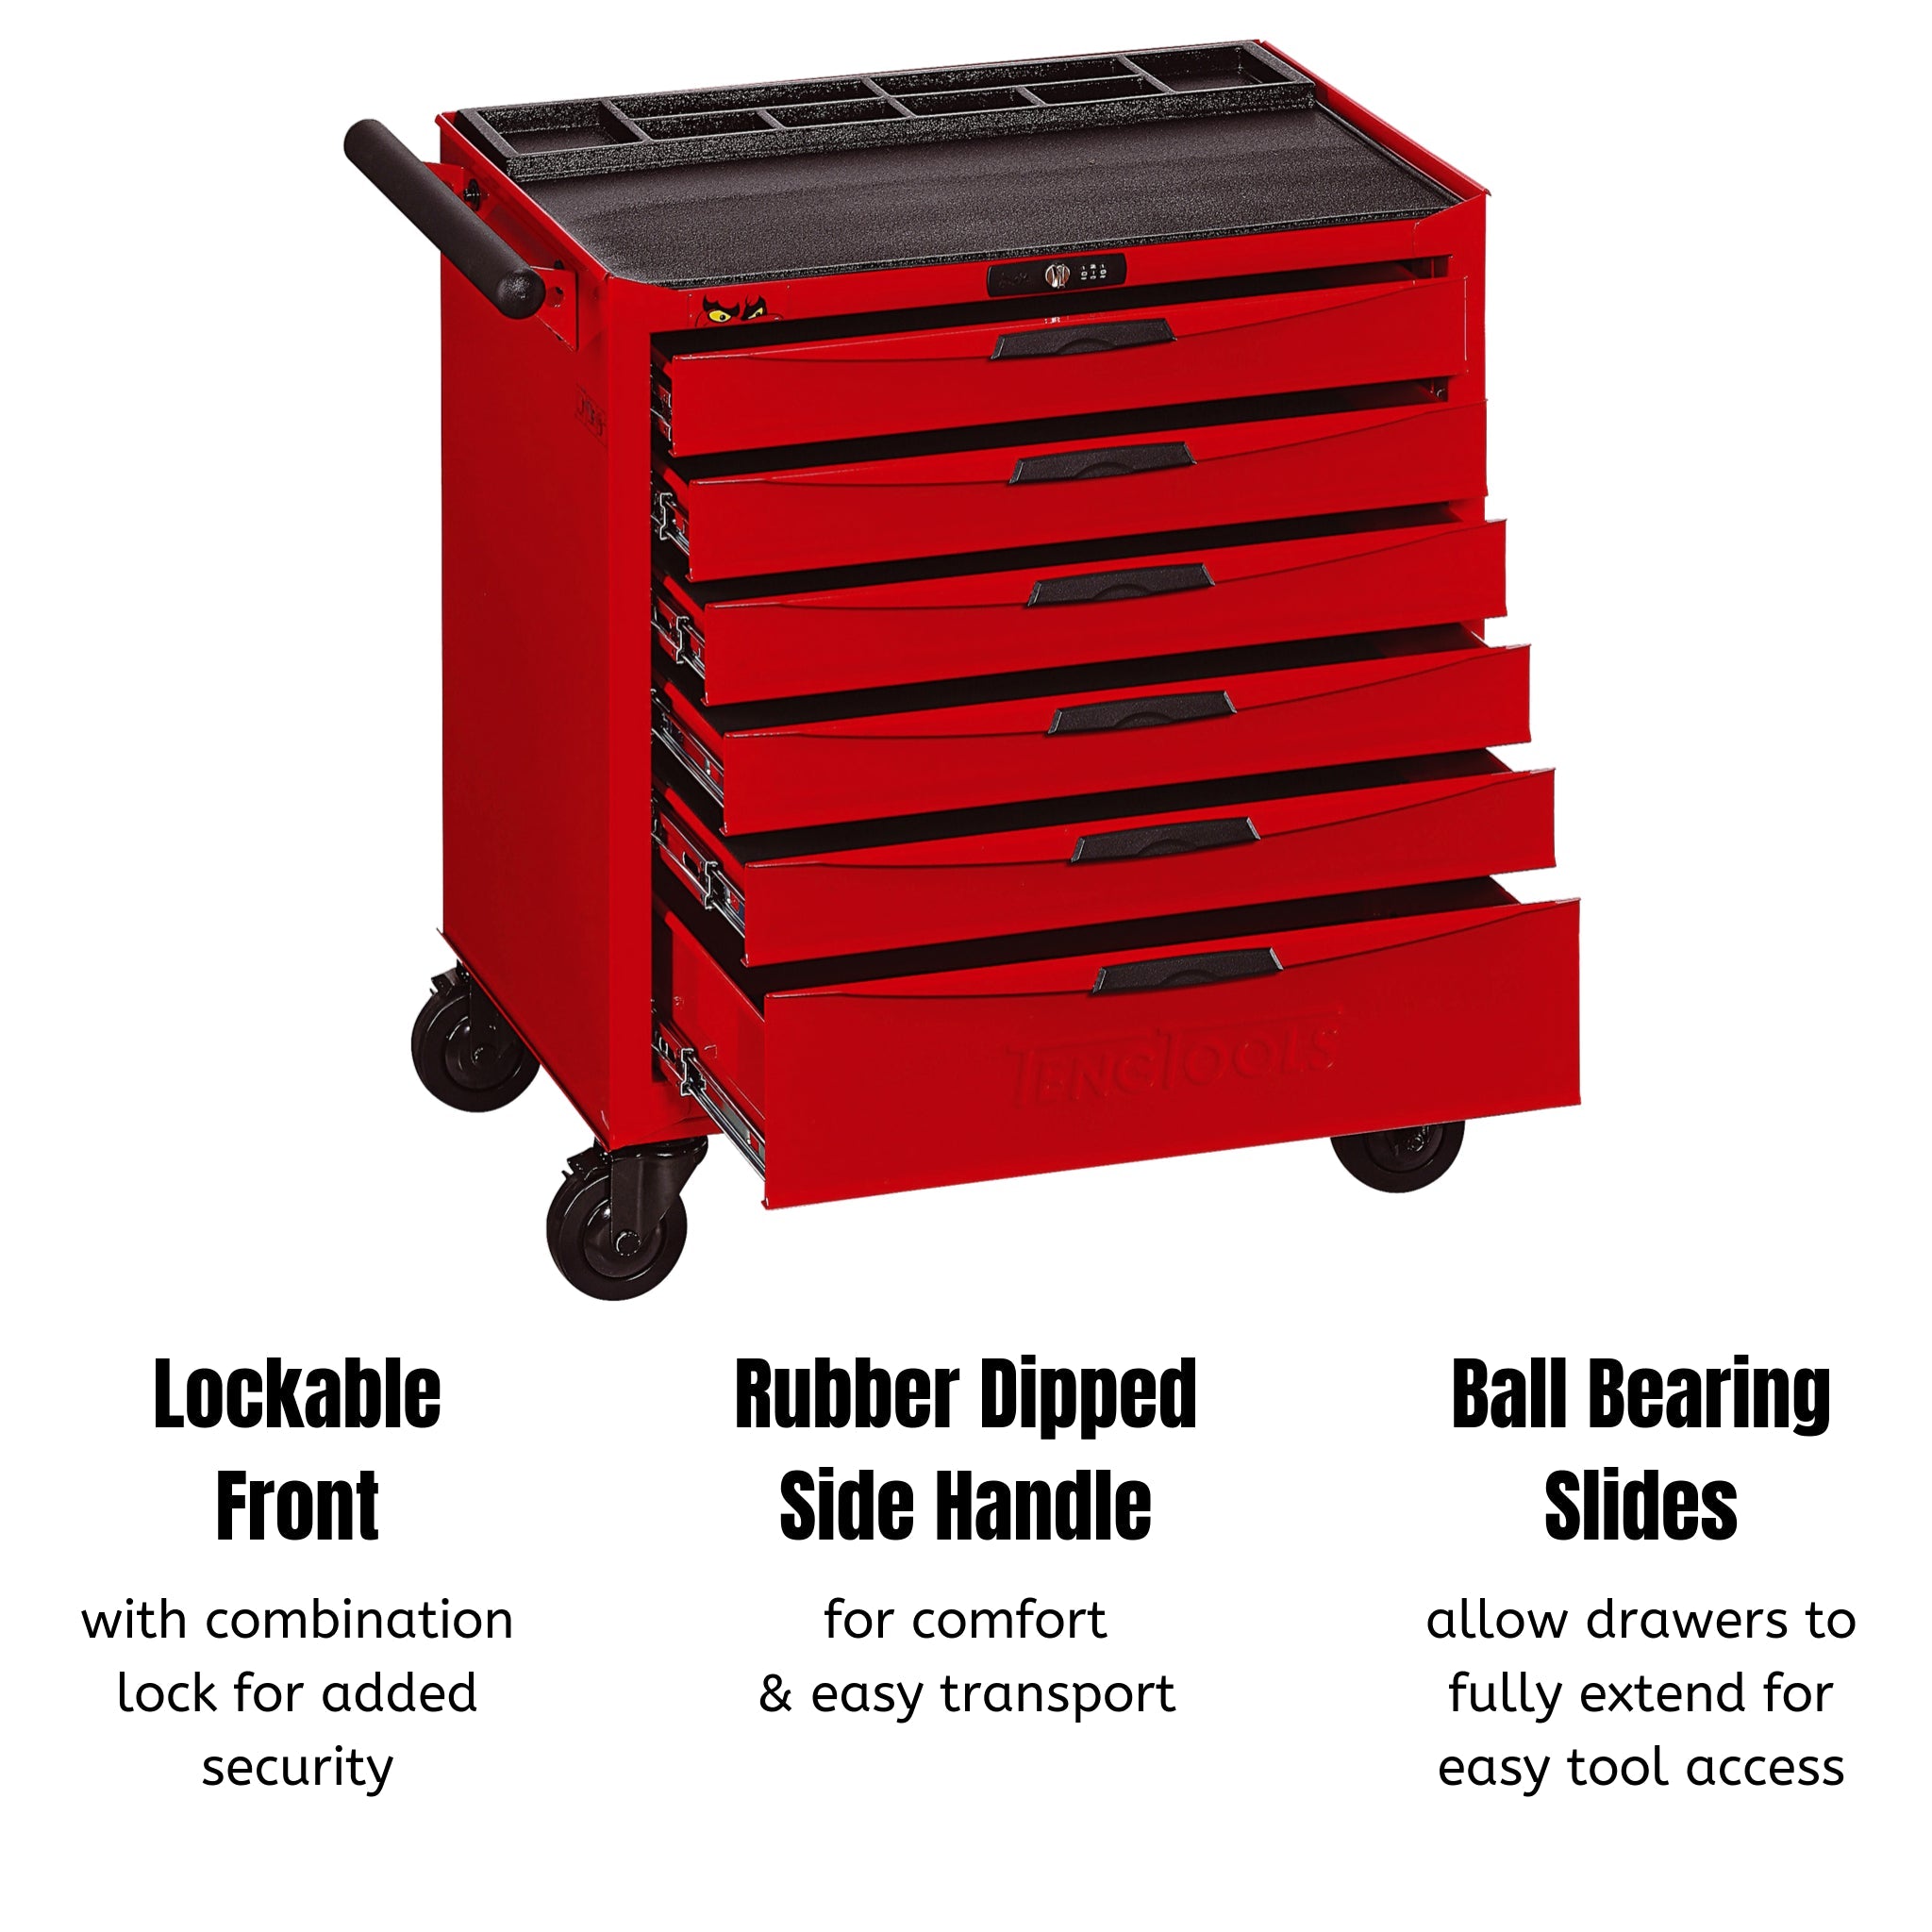 Teng Tools 6 Drawer Heavy Duty Roller Cabinet Tool Chest / Wagon - TCW806N